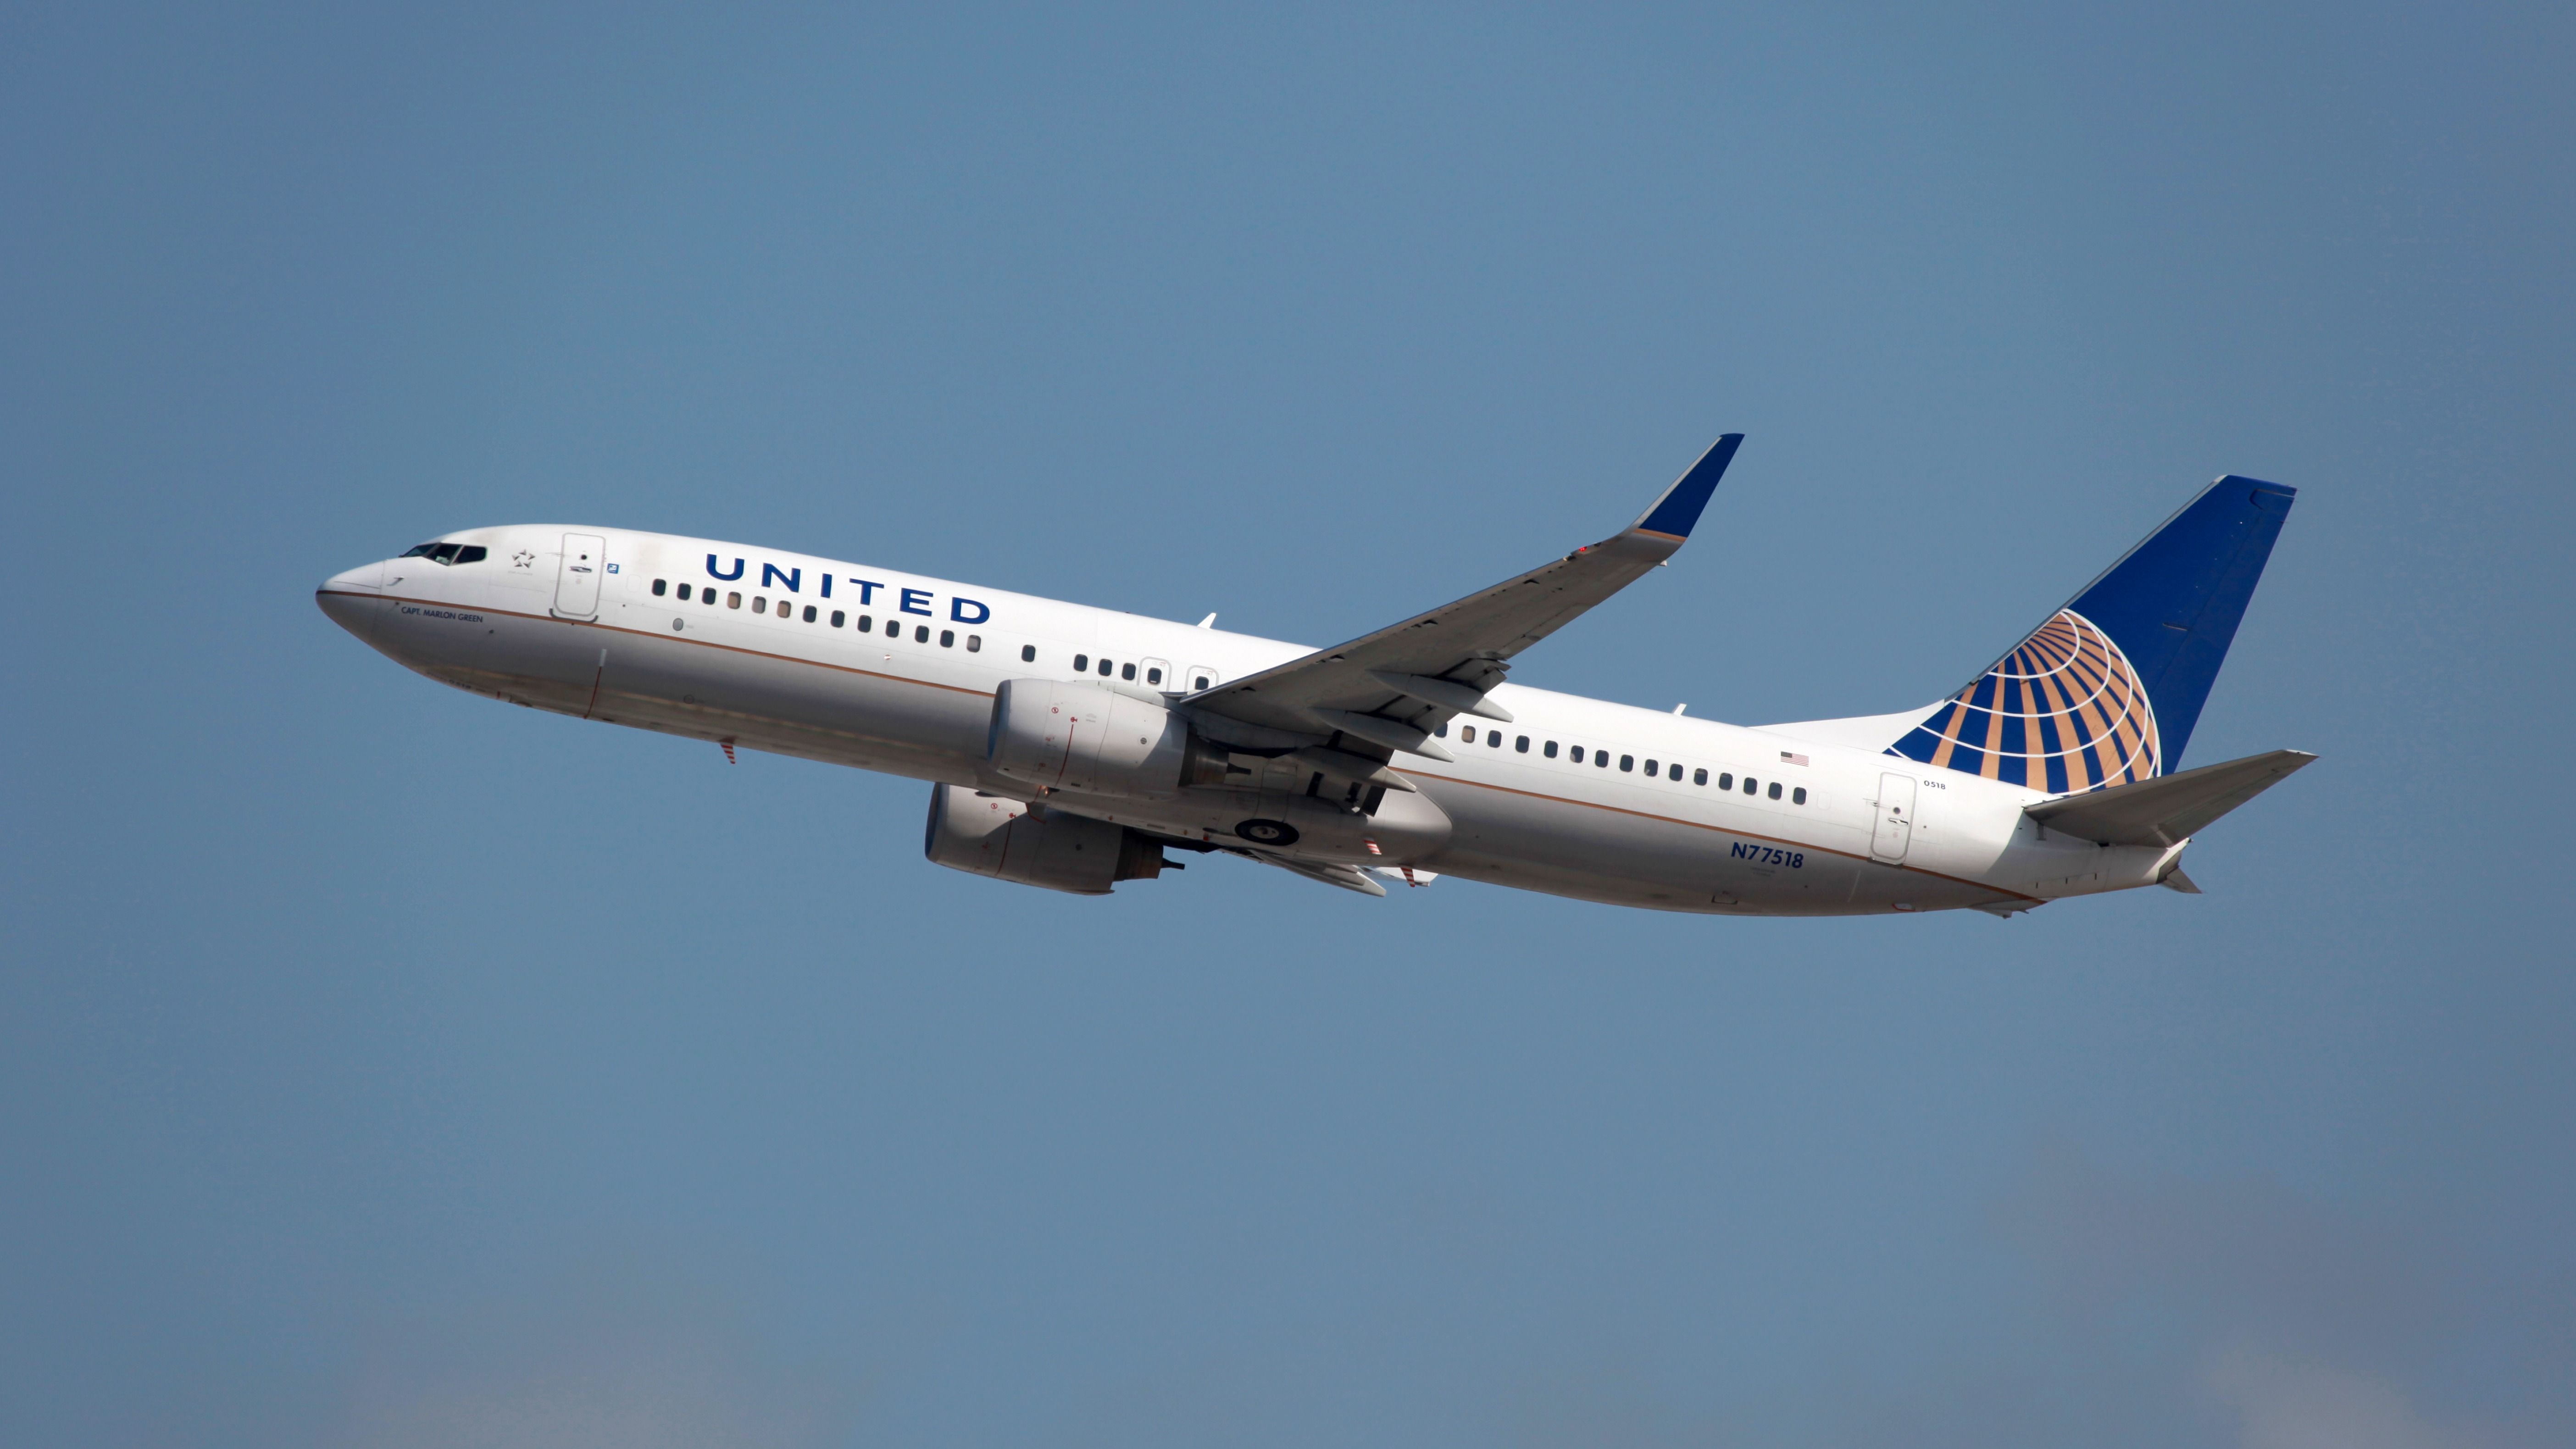 United Airlines 737-800 in flight